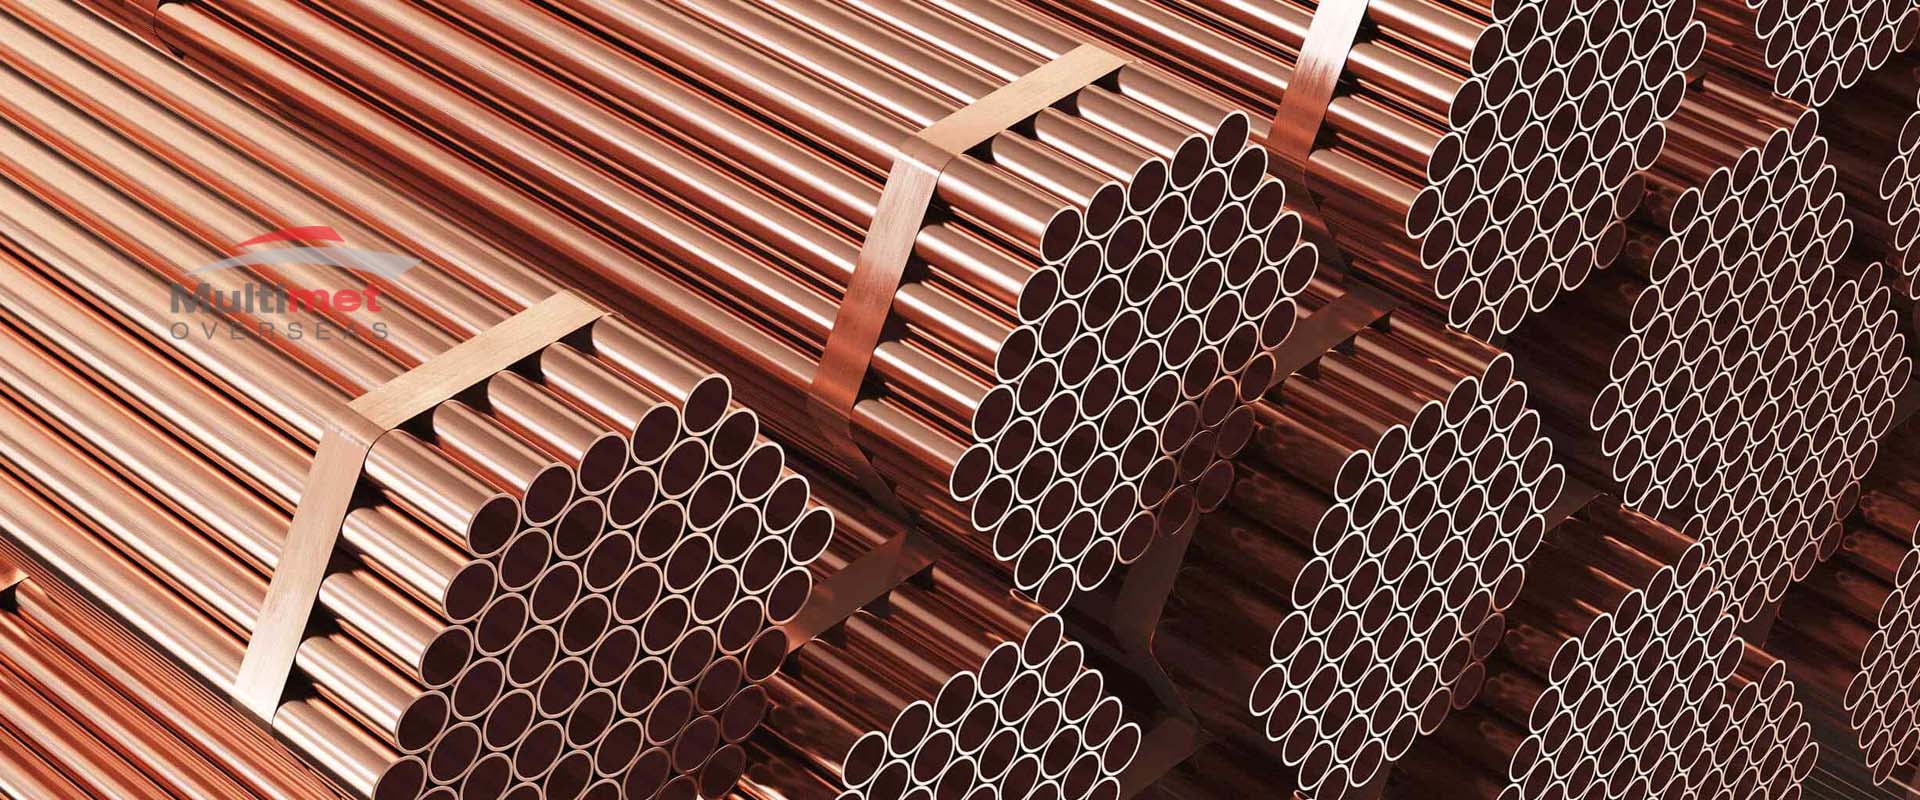 Copper Pipes Supplier